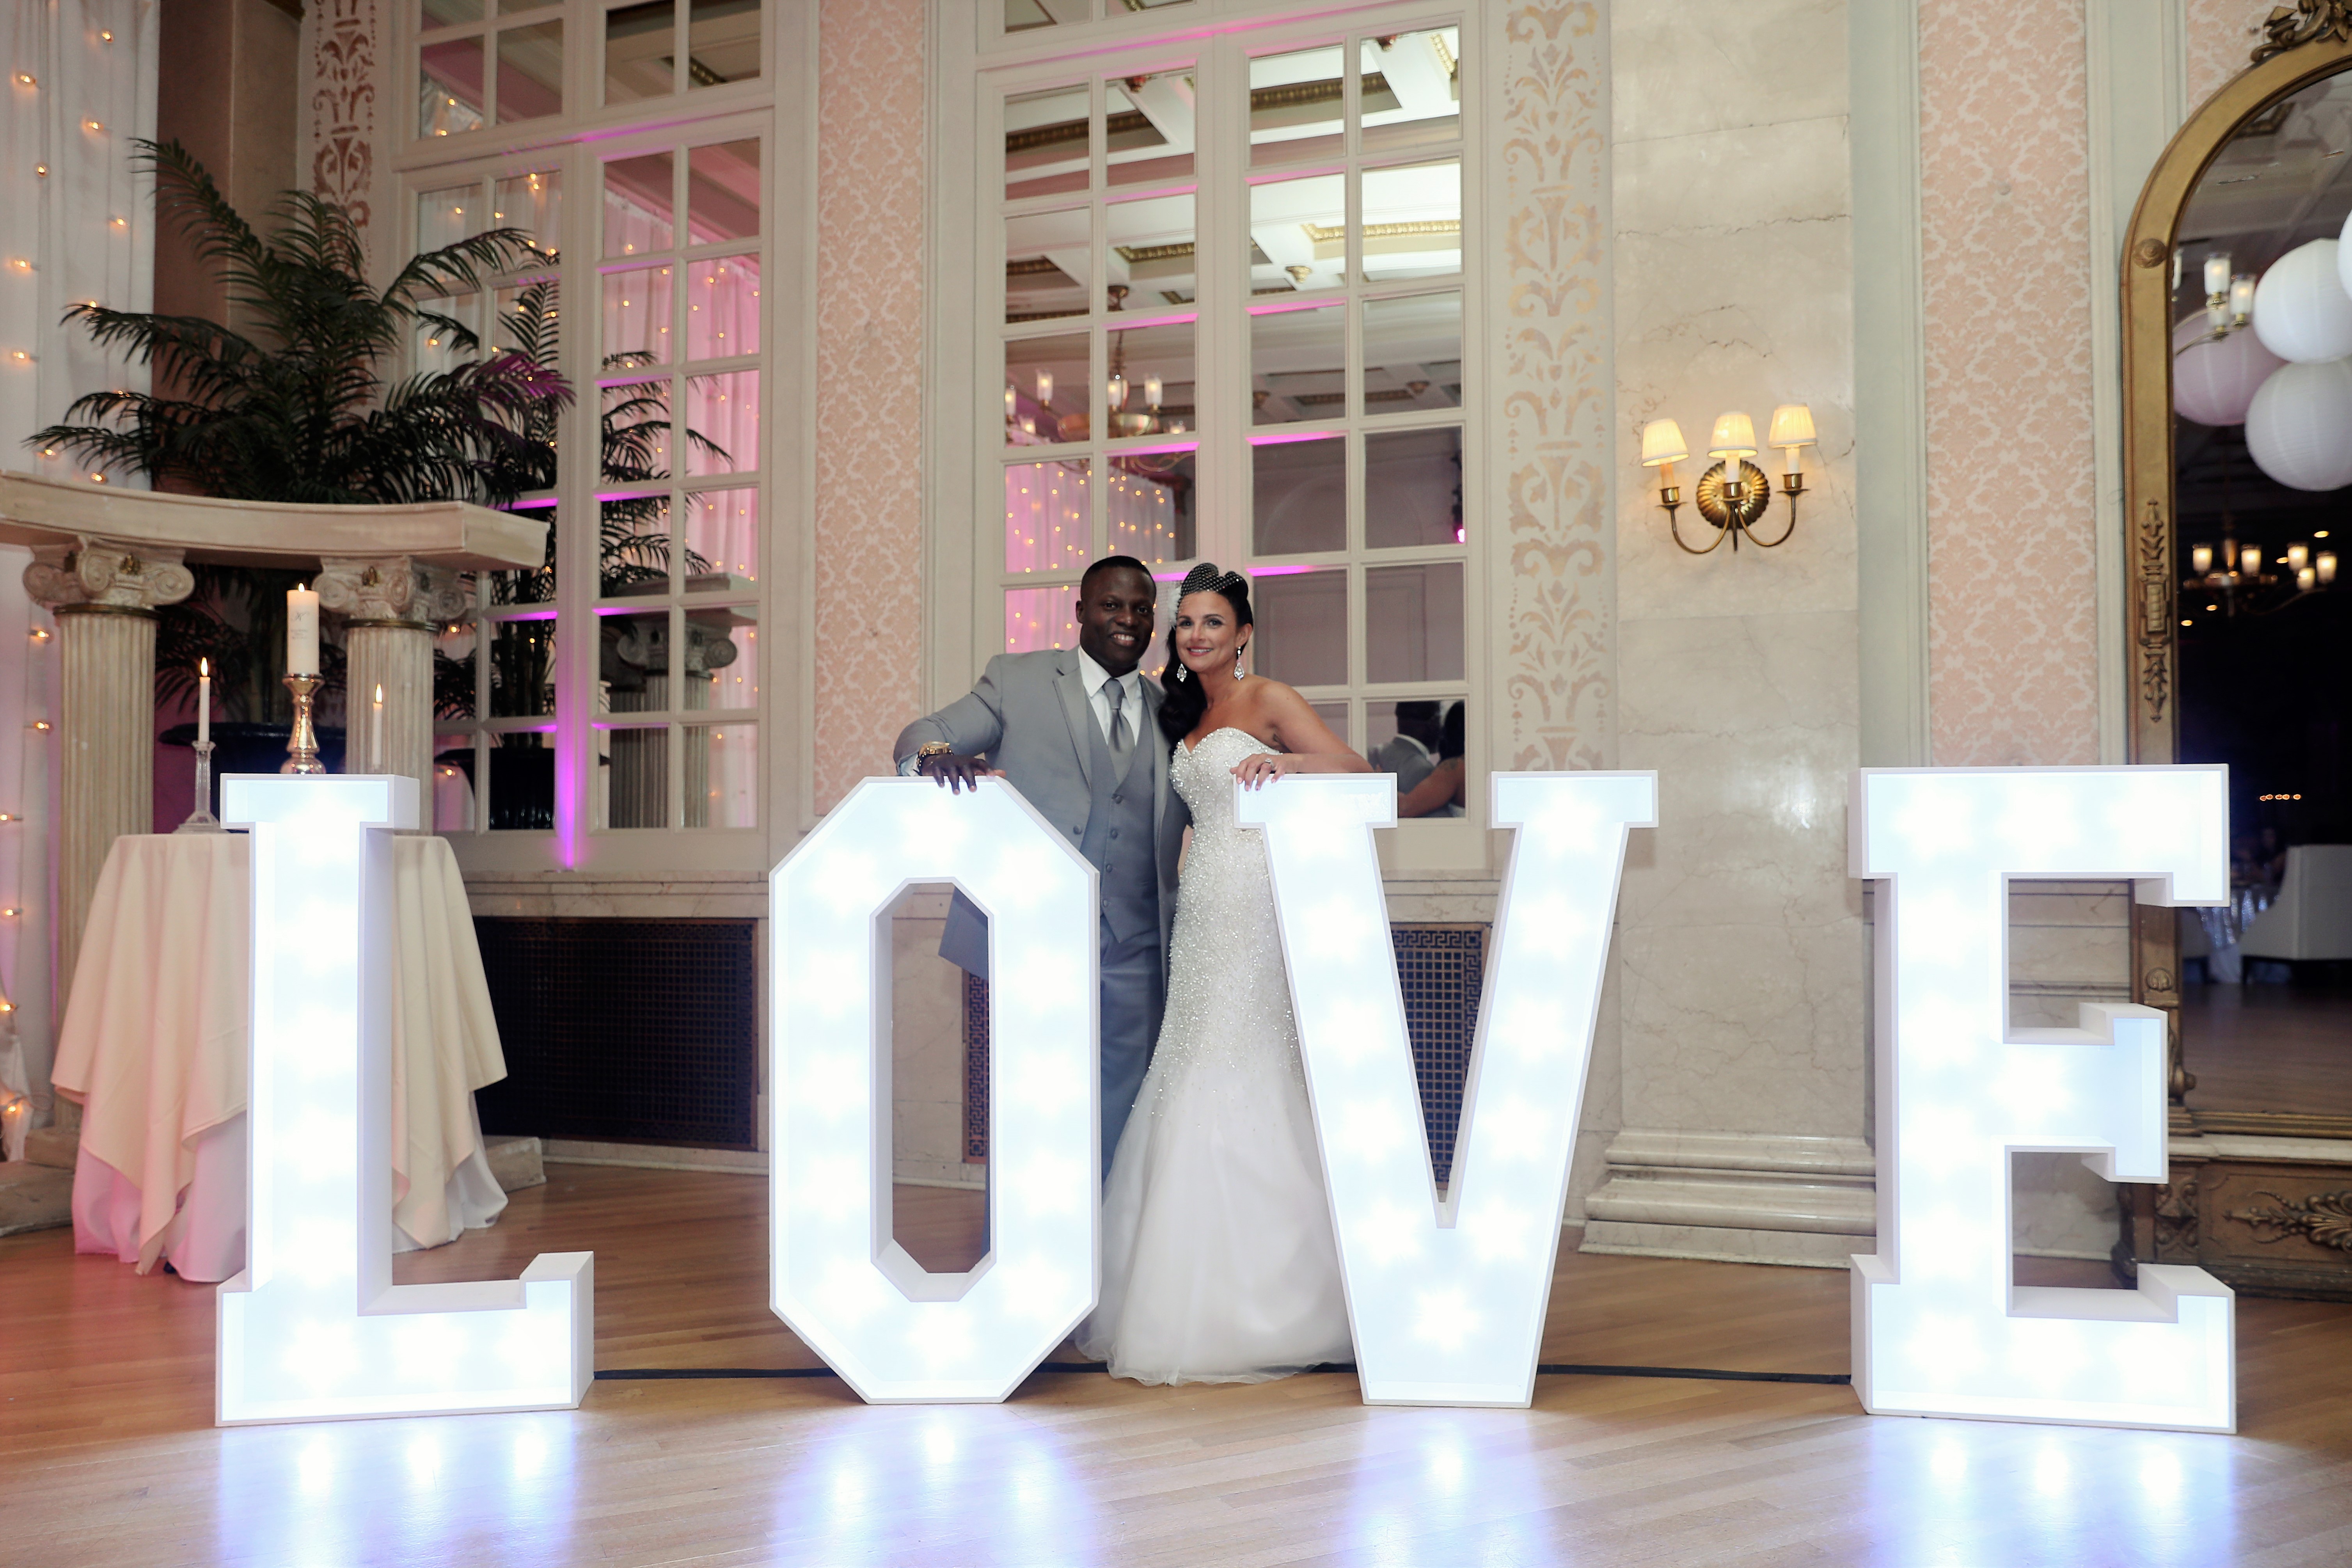 4' LOVE Light Up Letters - Photo by Paul Saunders Photography